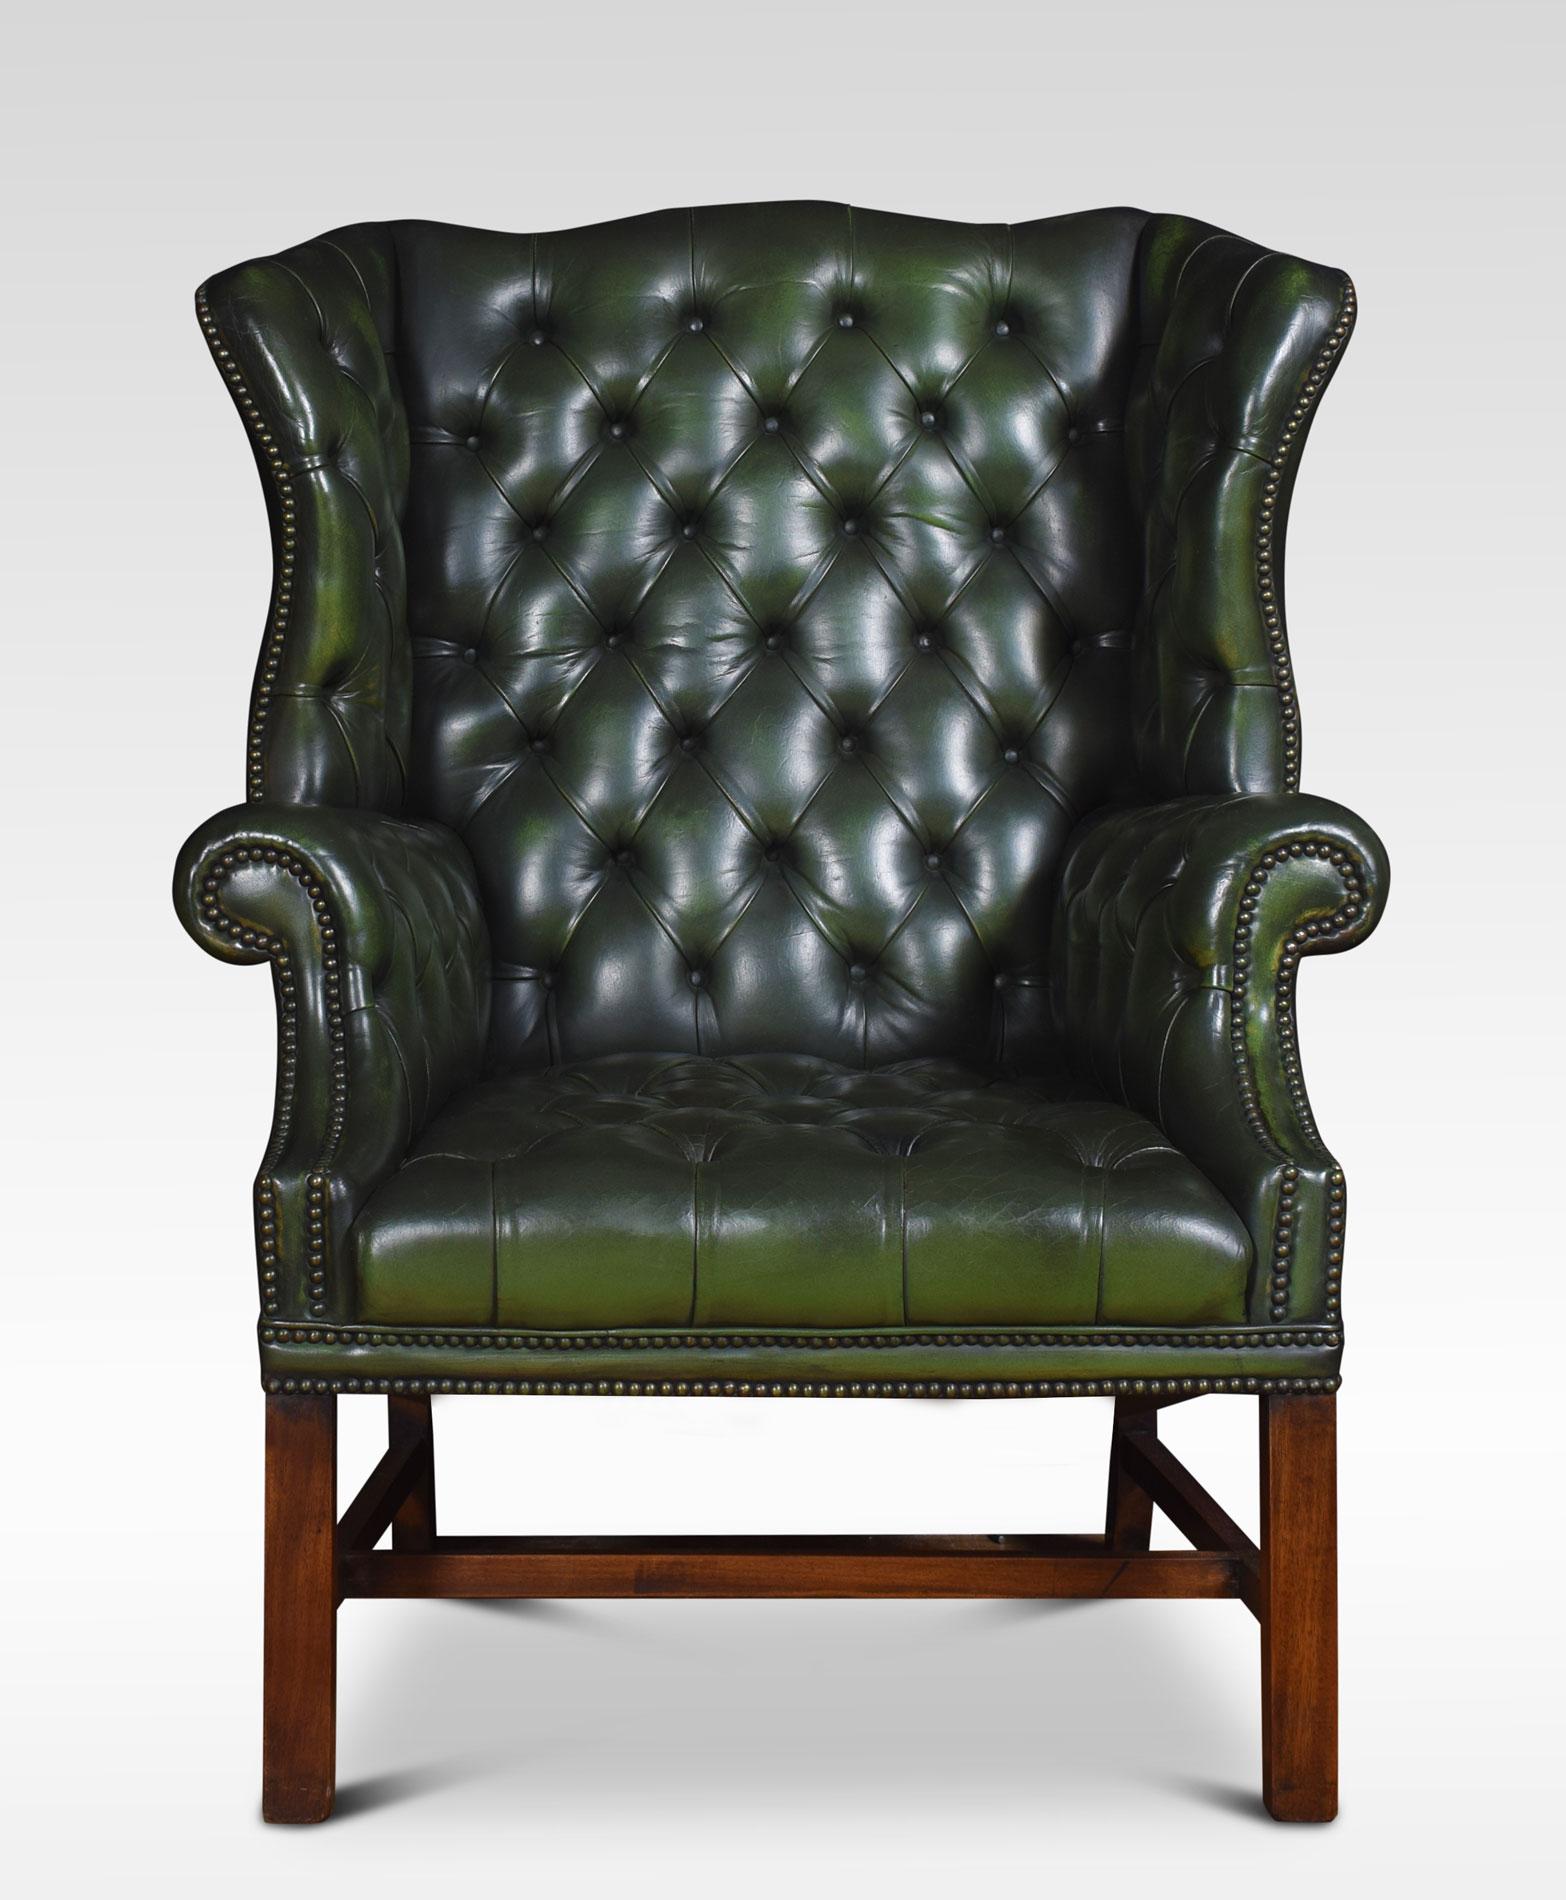 Mahogany framed wing armchair of generous proportions, the arched top above deep buttoned back, upholstered arms and seat in green leather, raised up on square supports united by a stretcher.
Dimensions:
Height 44 inches height to seat 17